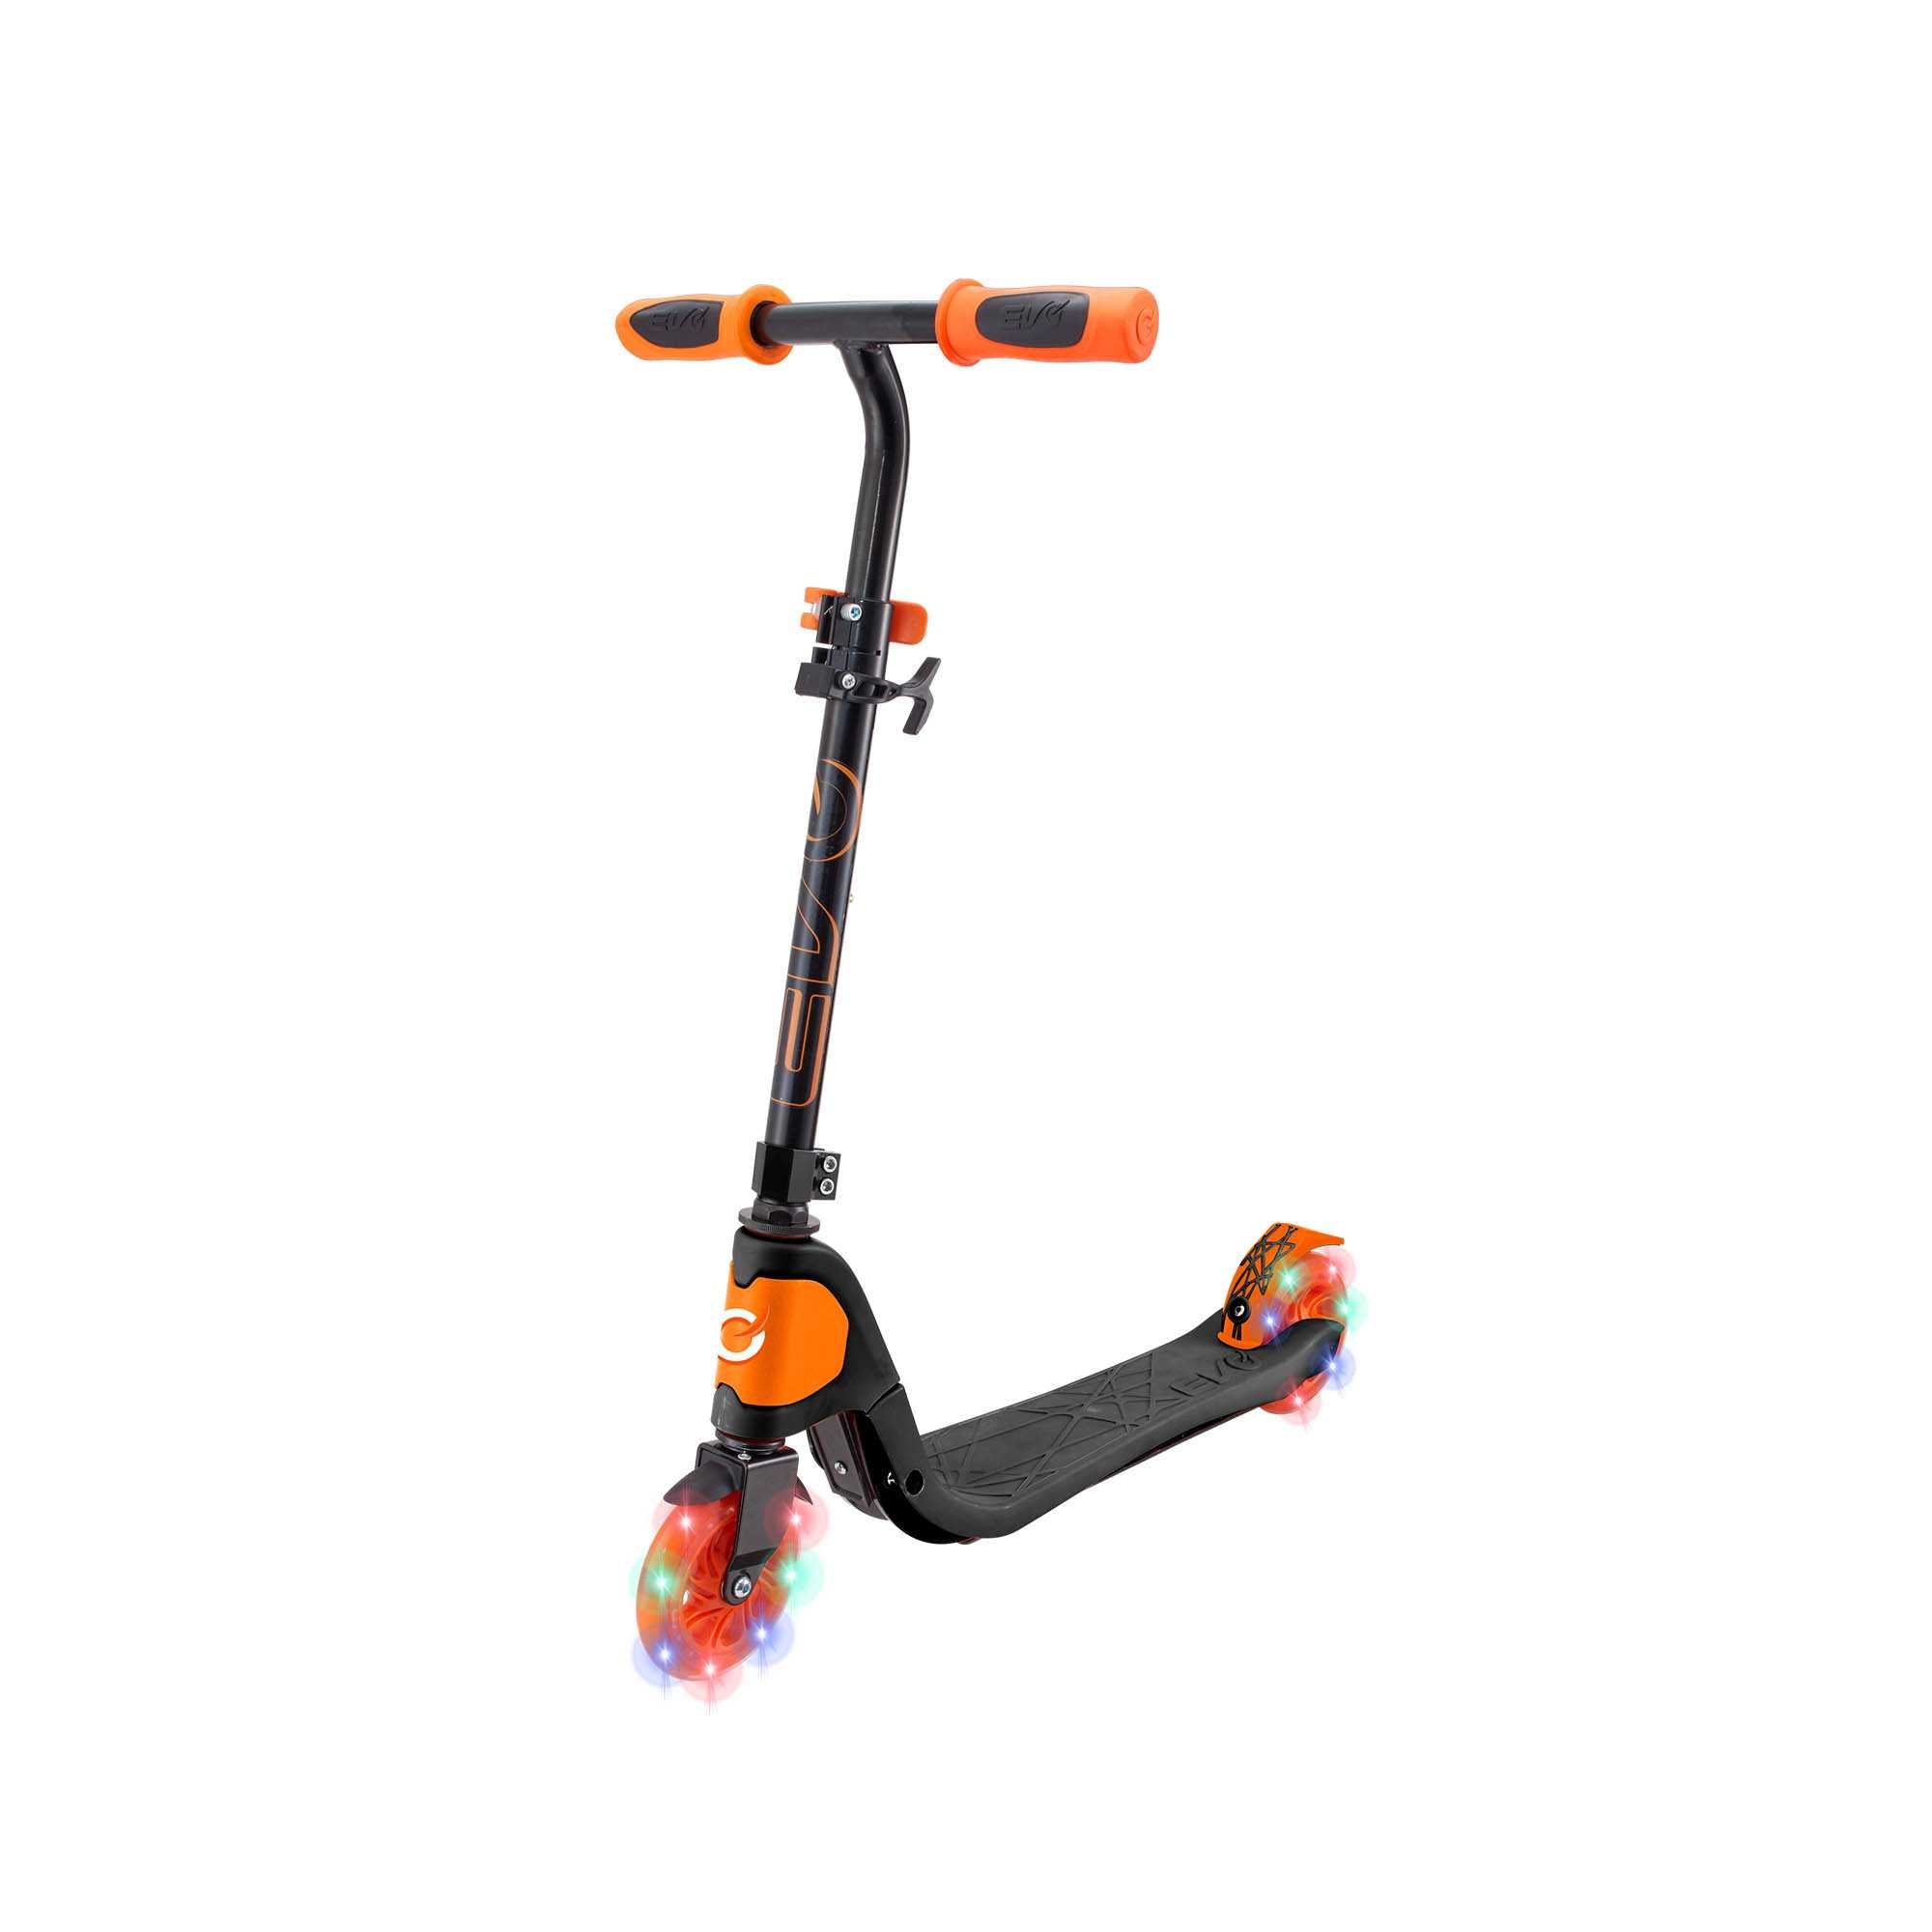 Speed Scooter, Scooter For 5 Year Olds, Push Scooter, Two Wheeled Scooter, Folding Scooter, Light Up Scooter, Light Blast 2 Wheel Scooter